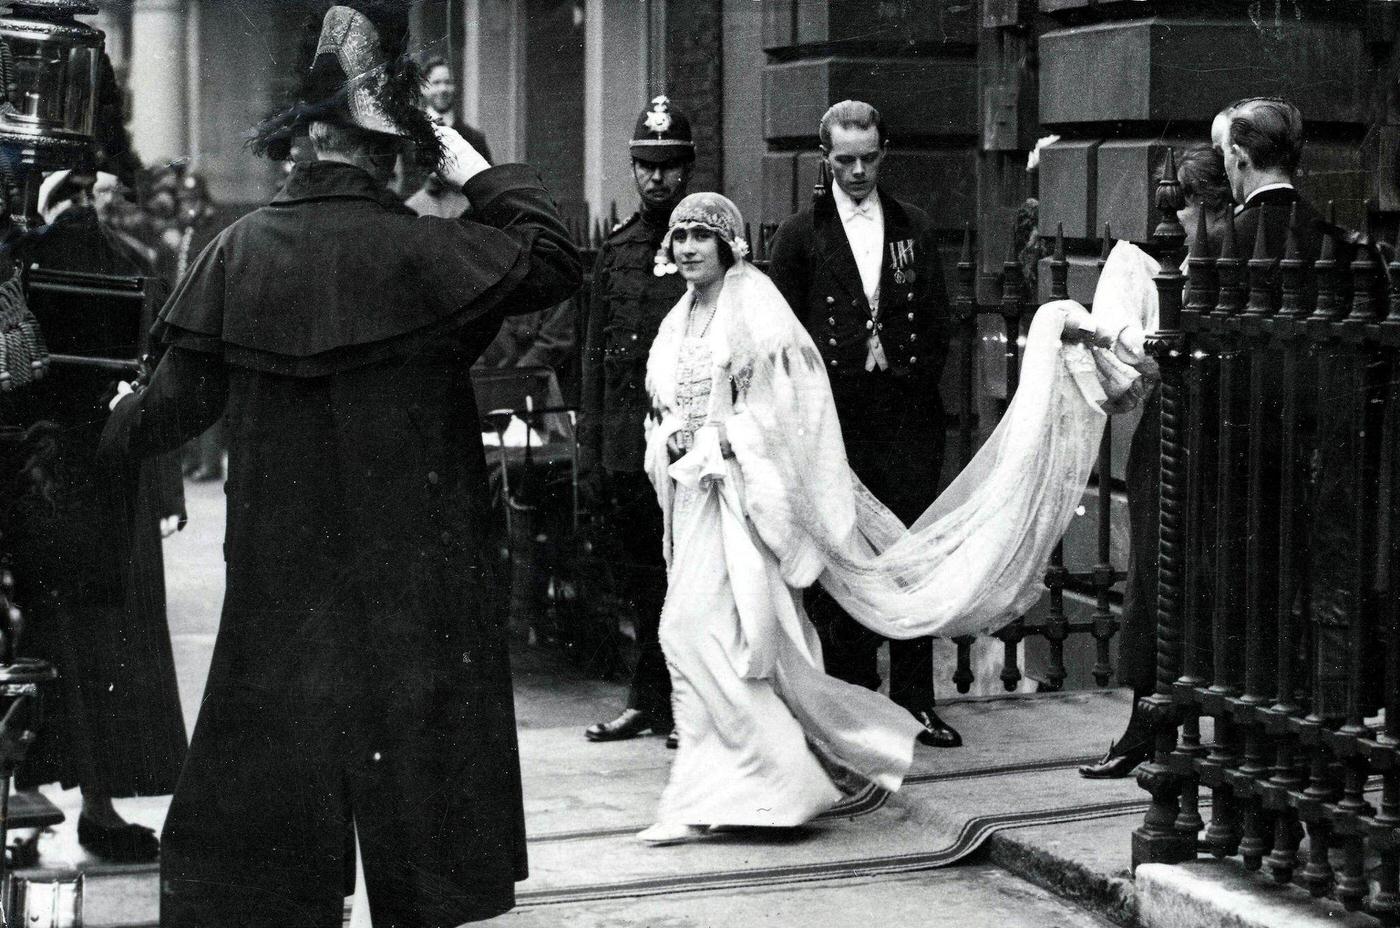 Young Queen Mother as Lady Elizabeth Bowes Lyon leaving her London home for her wedding to the Duke of York, 26th April 1923.